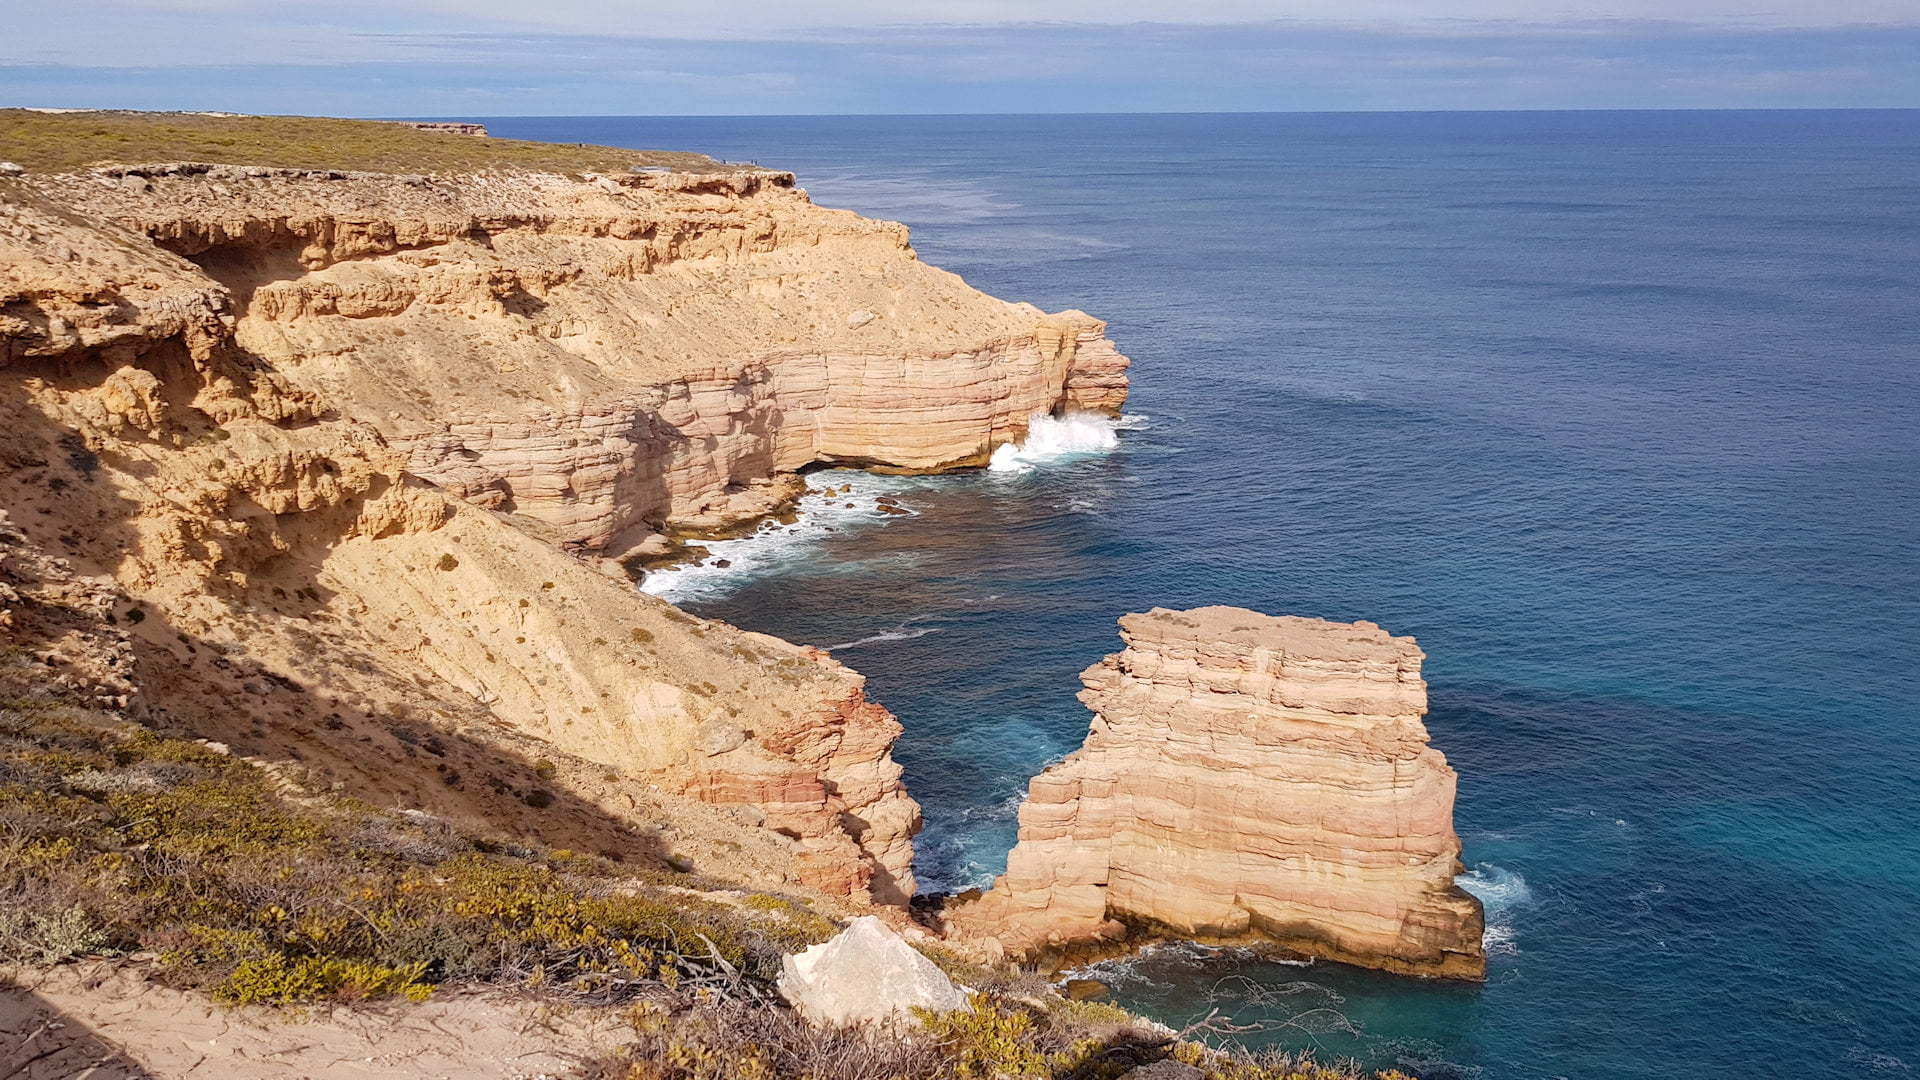 Rugged sandstone coastline with a solitary rock stack off the shoreline, taken at Island Rock in Kalbarri National Park